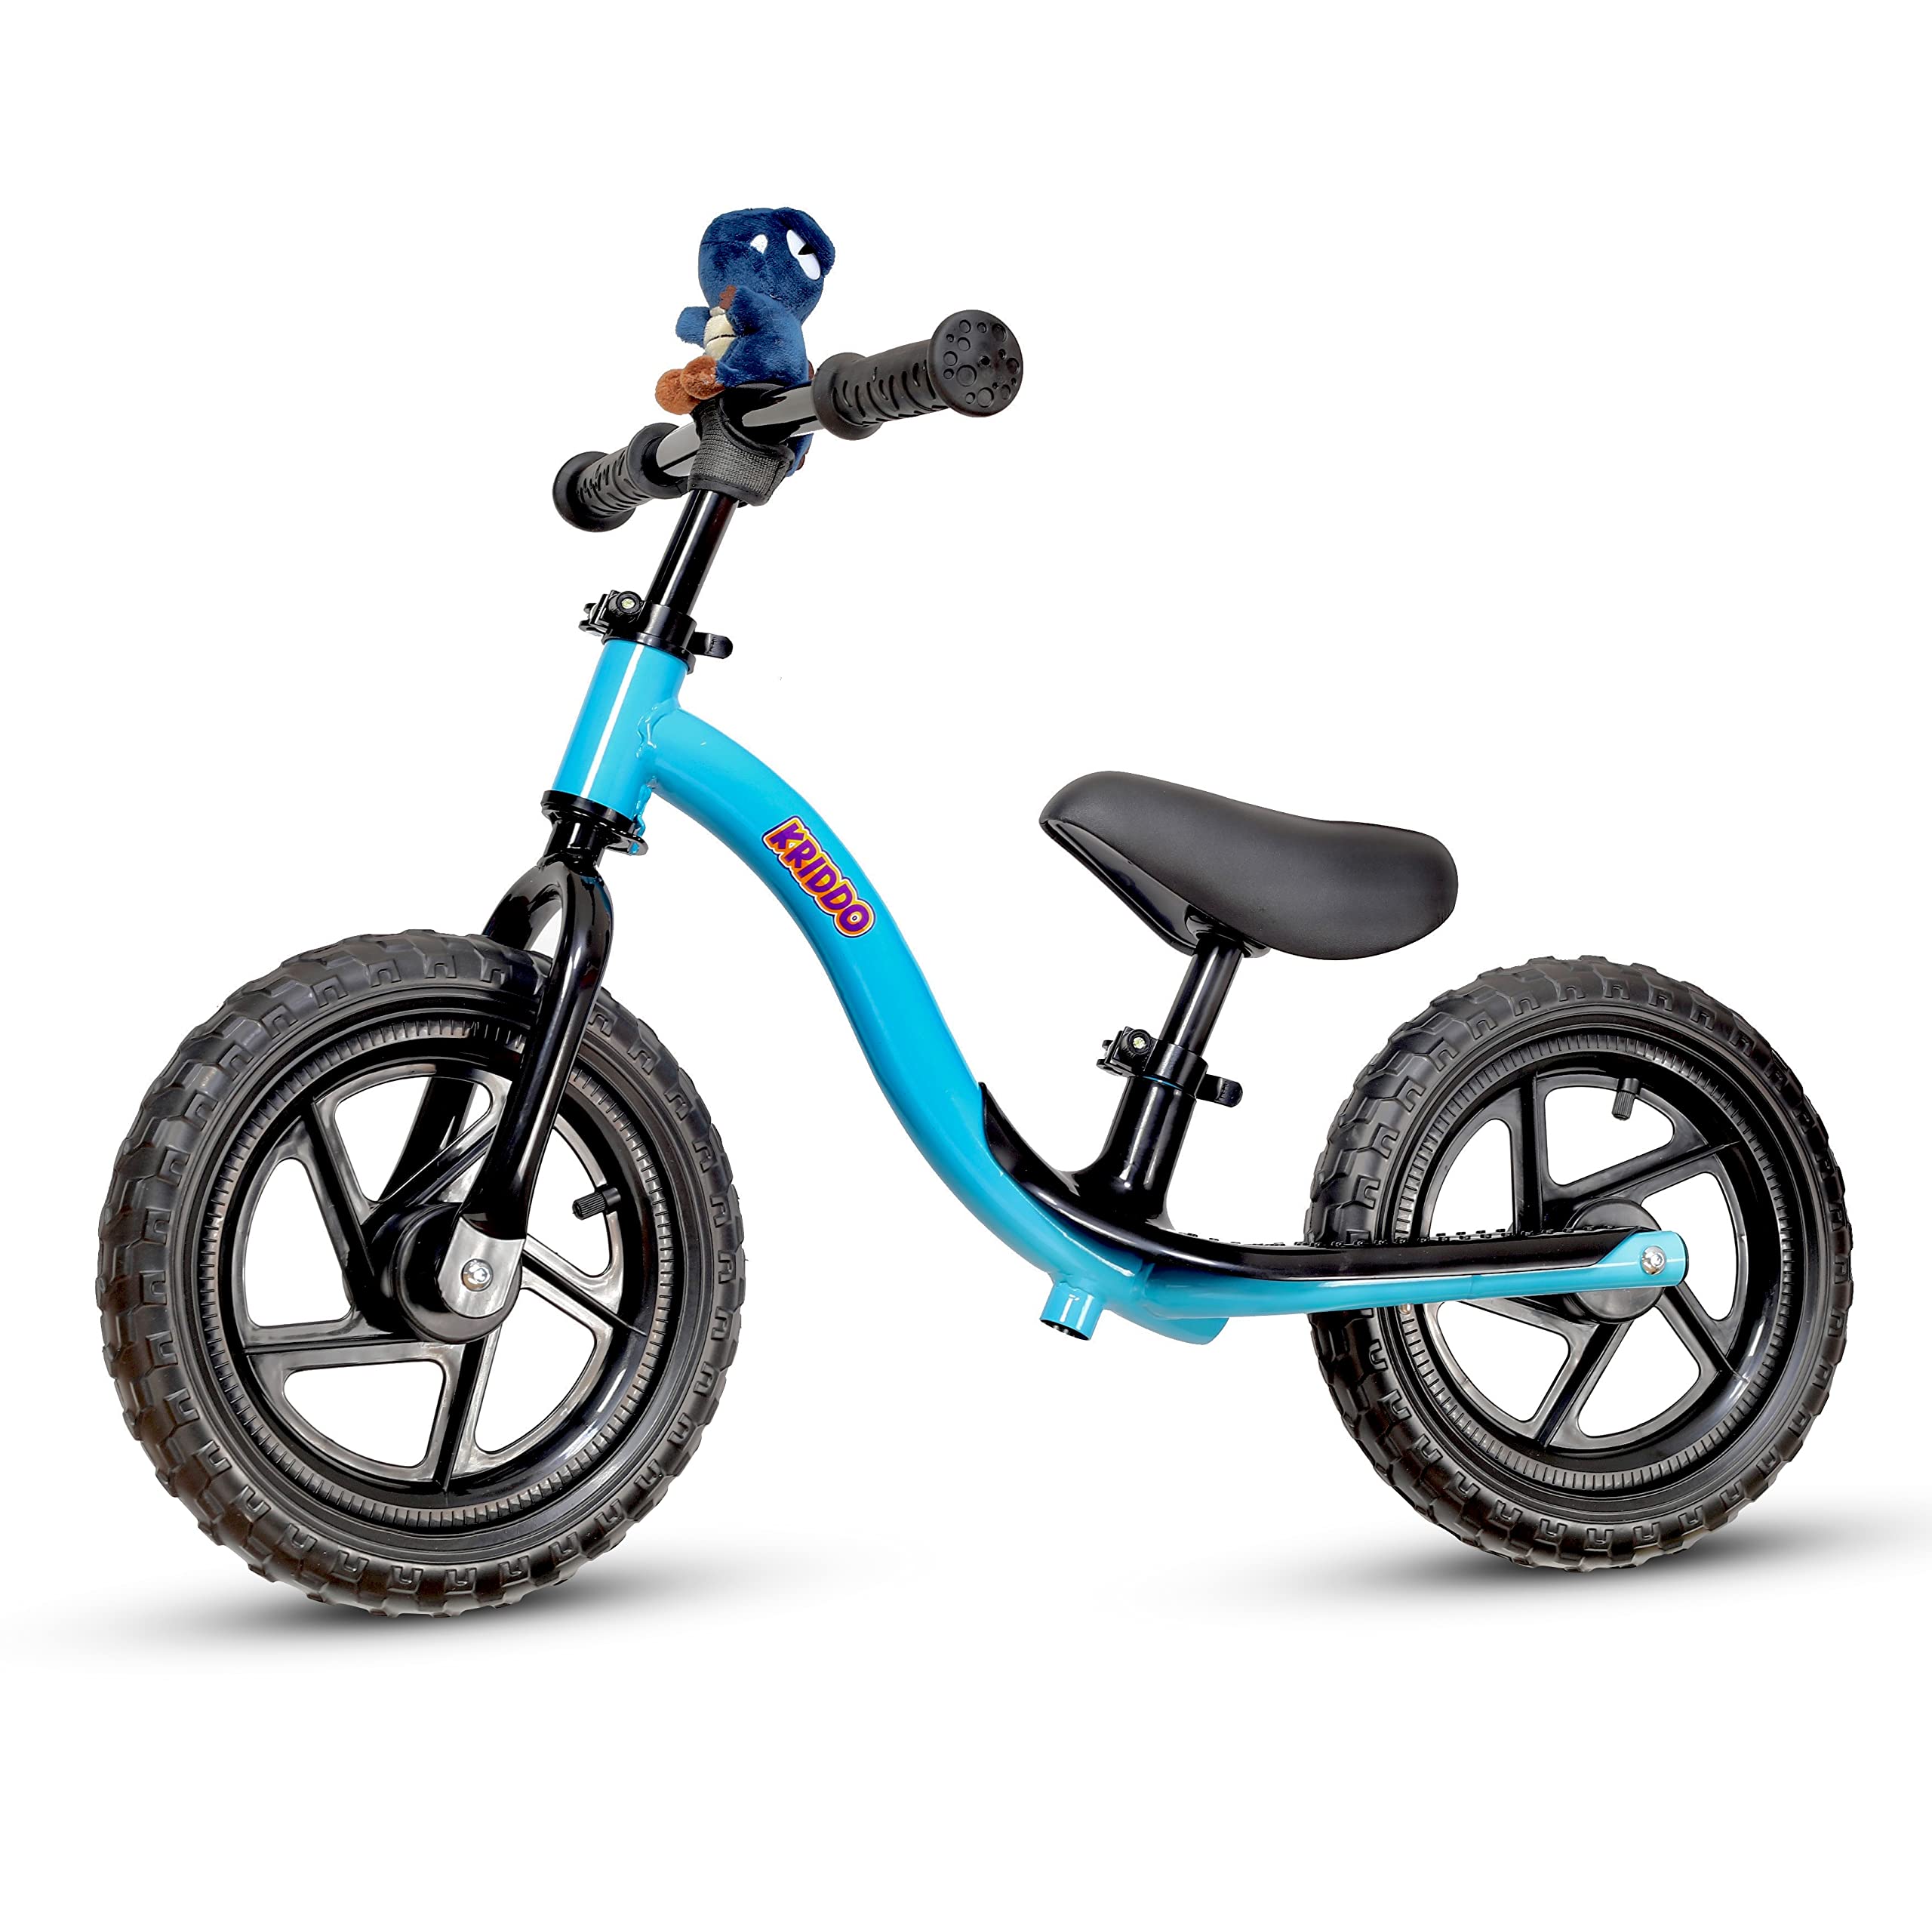 KRIDDO Toddler Balance Bike 2 Year Old, Age 18 Months to 5 Years Old, Early Learning Interactive Push Bicycle with Steady Balancing and Footrest, Gift for 2-5 Boys Girls, Blue